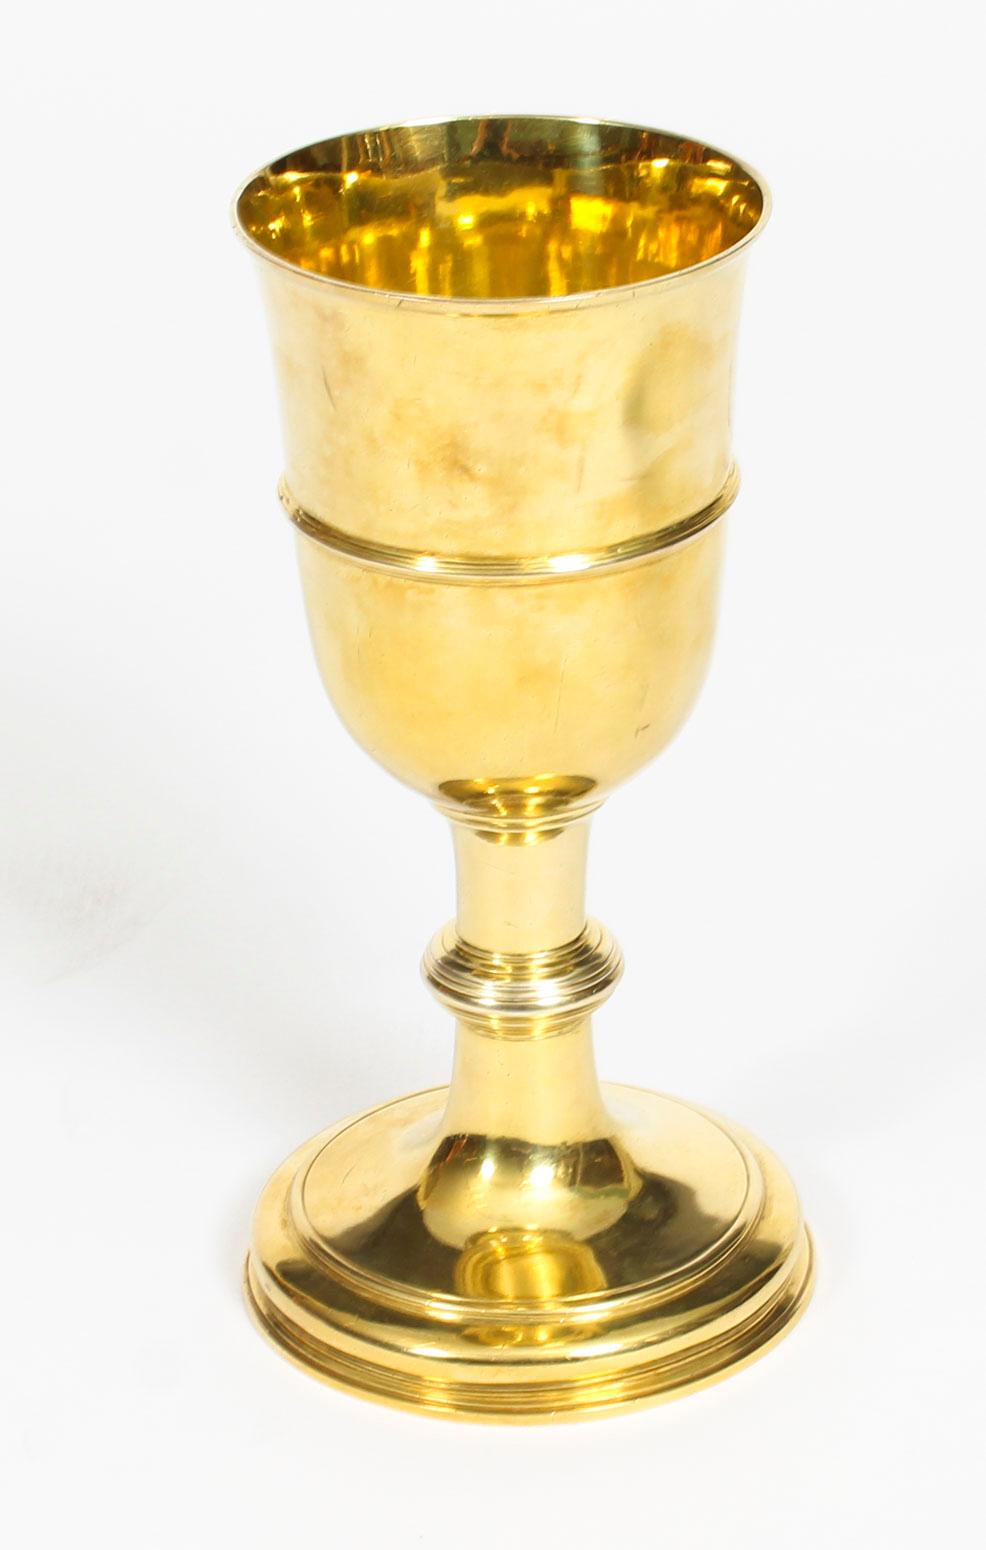 This is a fabulous antique George II English silver gilt chalice bearing hallmarks for London 1745 and the makers mark of the world renowned silversmith Paul de Lamerie. 

Bearing the maker's mark for Paul de Lamerie, P.L in script under a crown